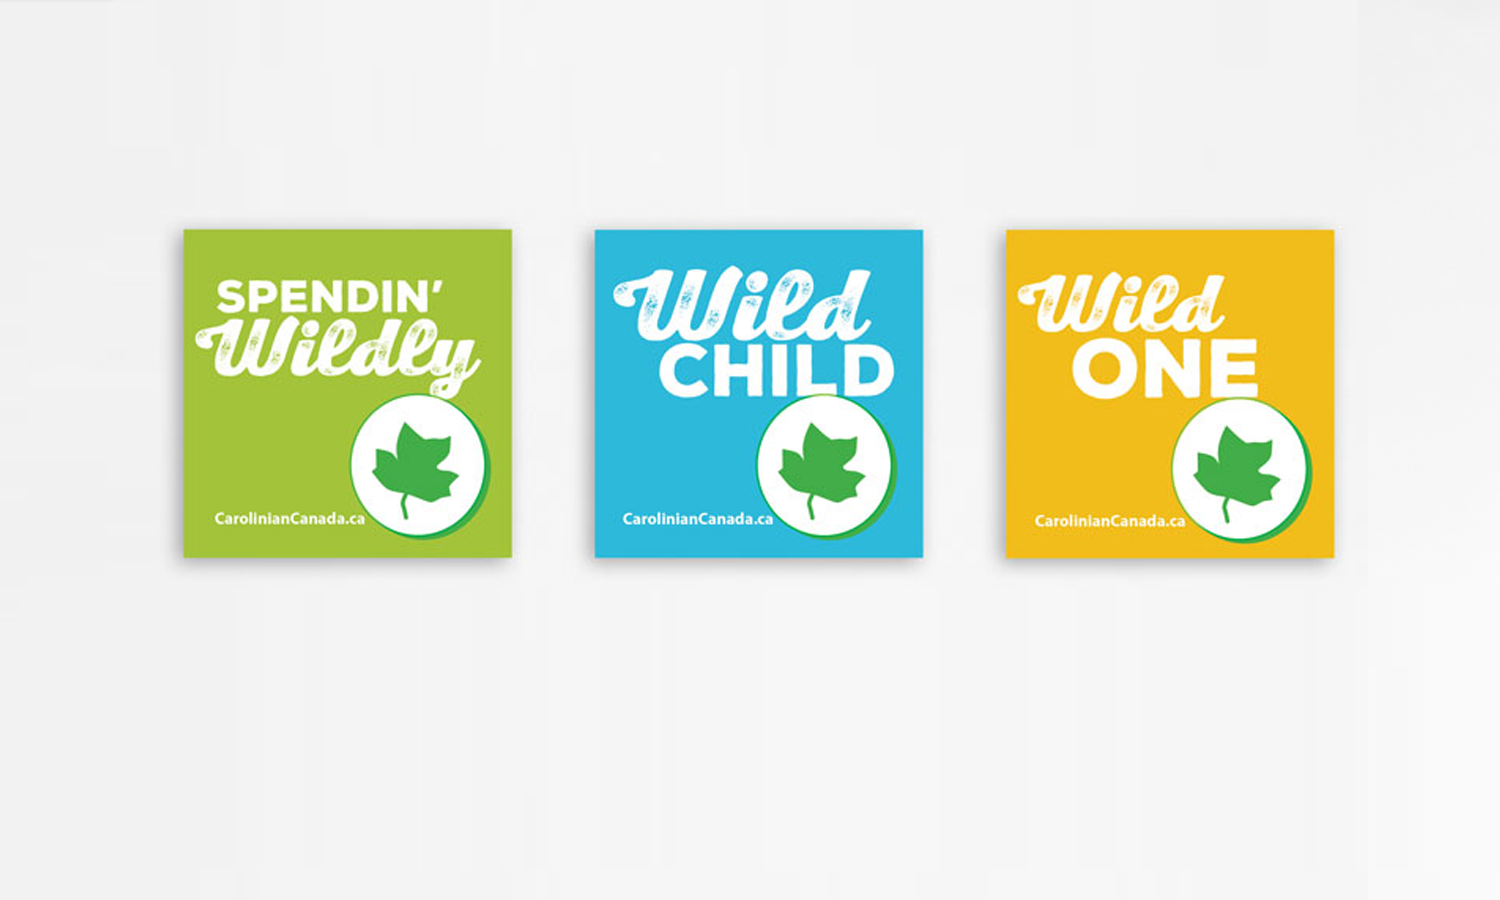 Images of sticker hand outs: Spendin' Wildly, Wild Child, and Wild One